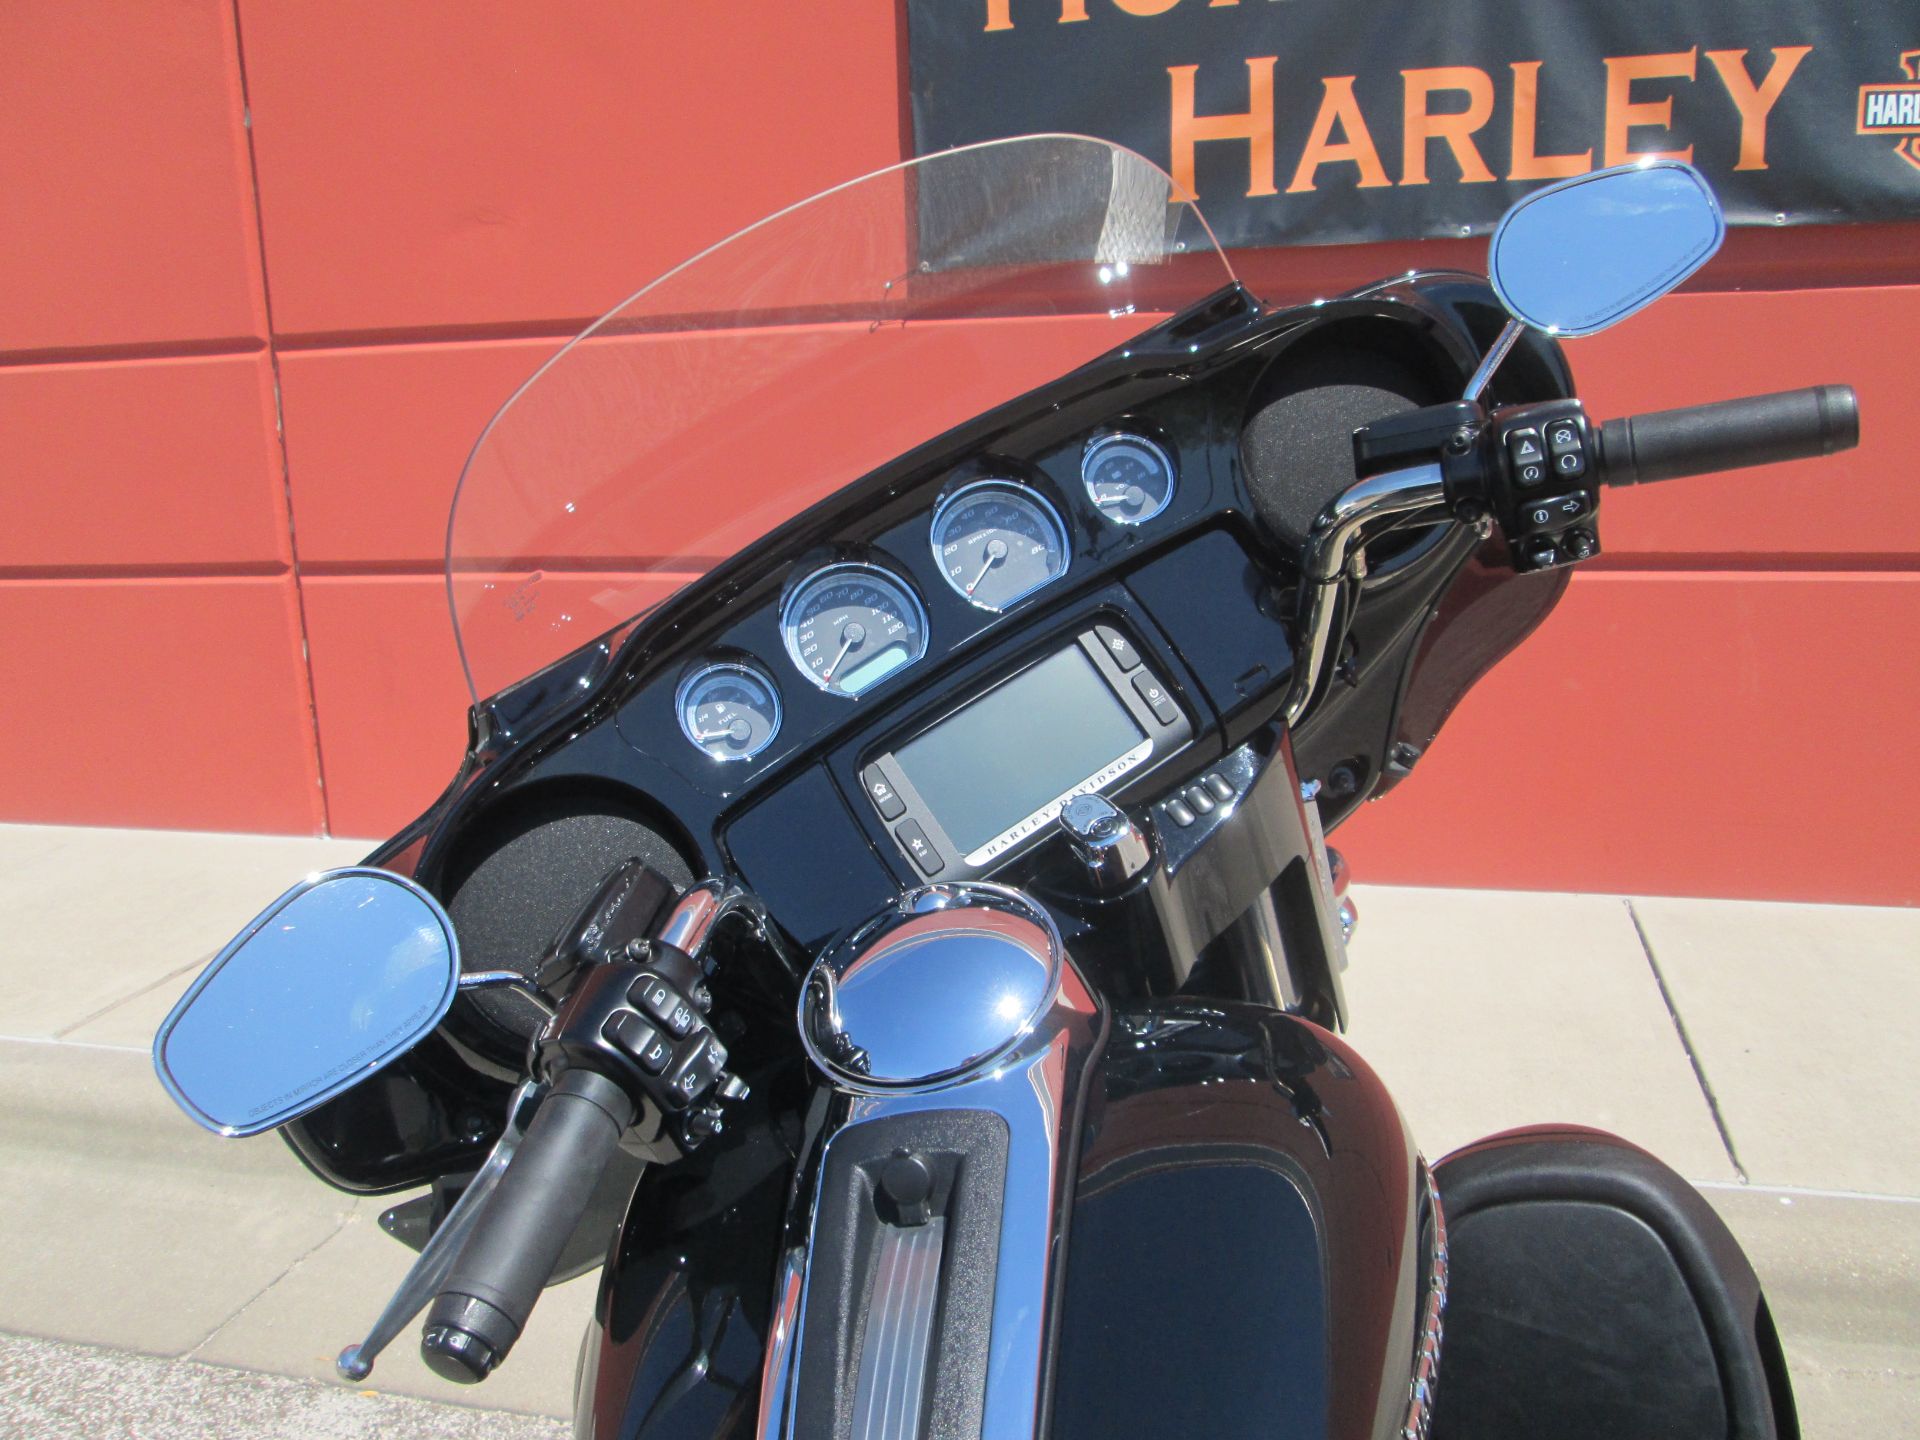 2016 Harley-Davidson Ultra Limited in Temple, Texas - Photo 15